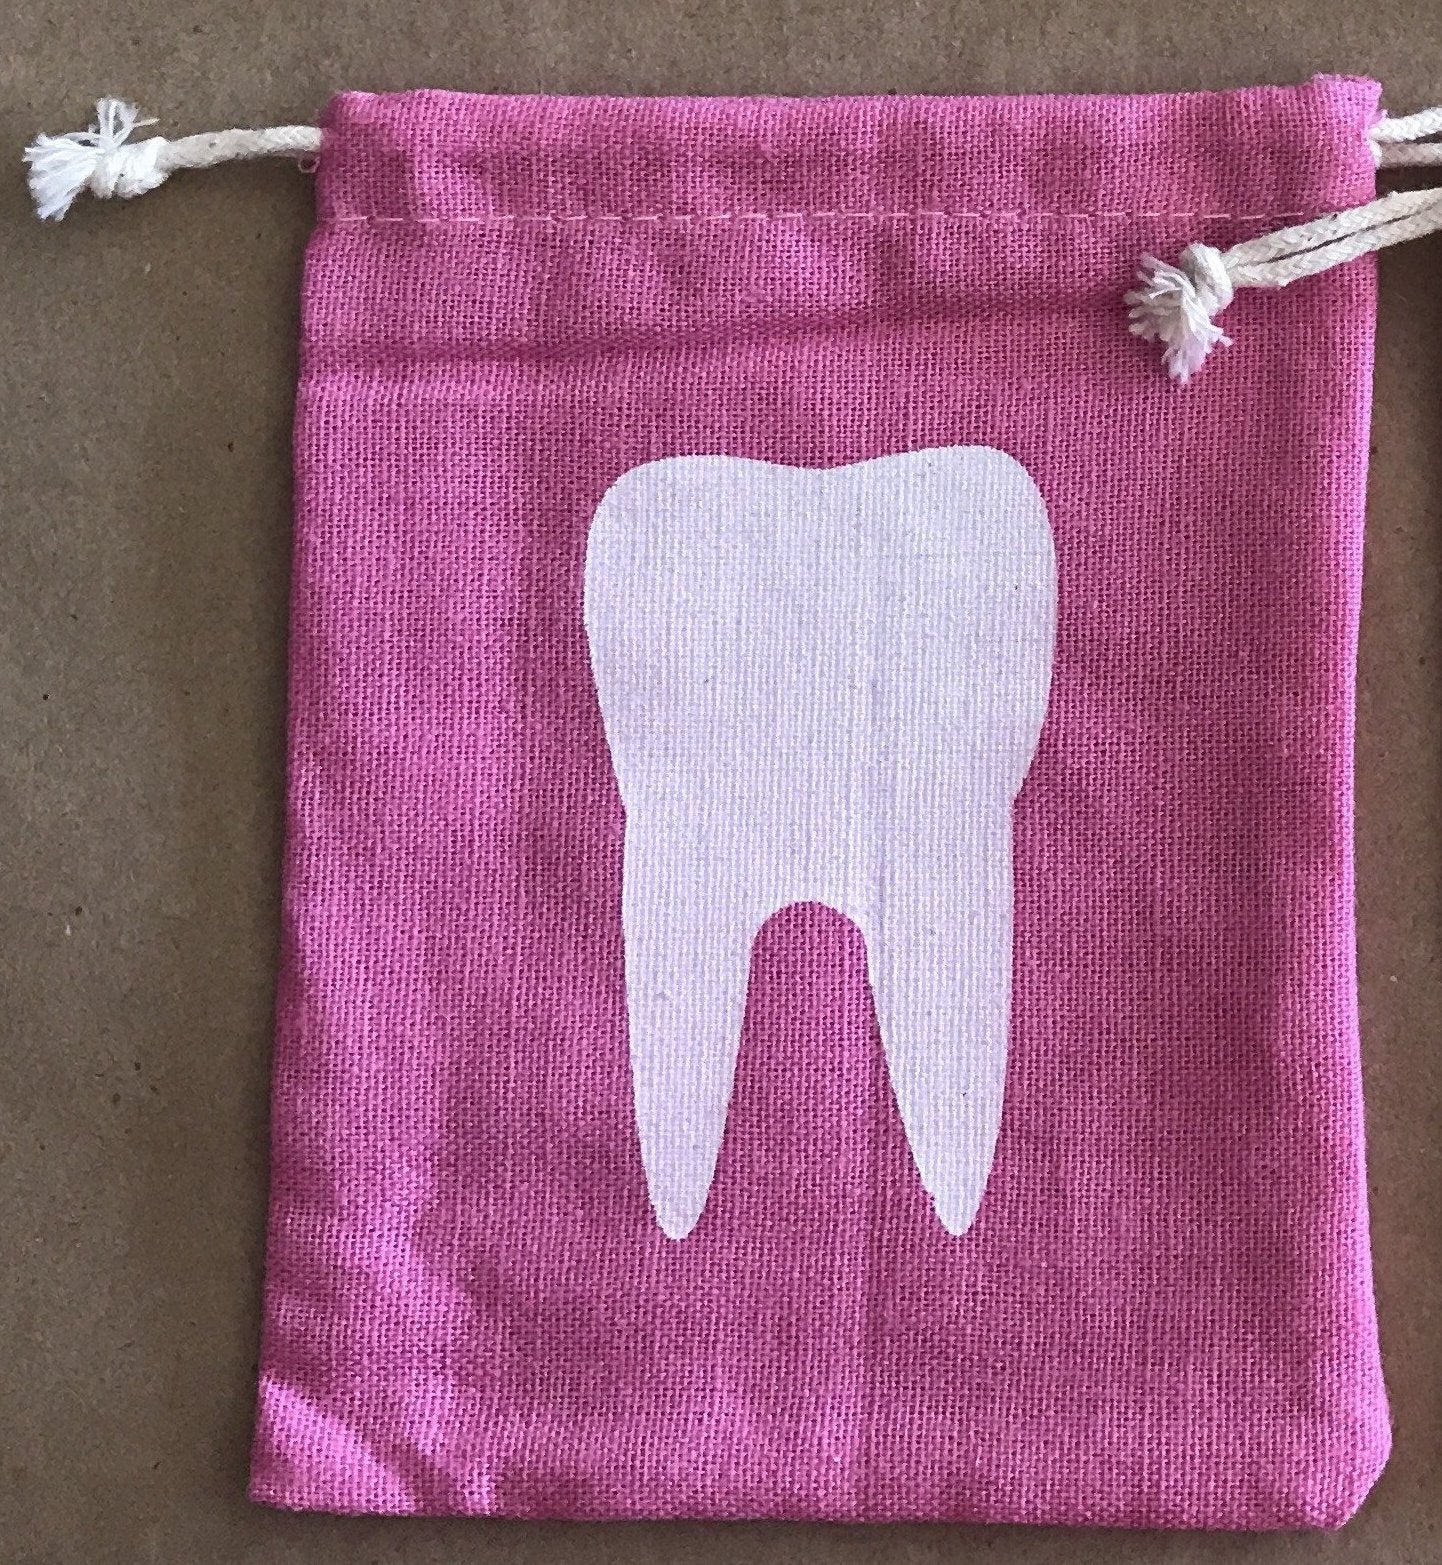 Bags: Tooth Fairy